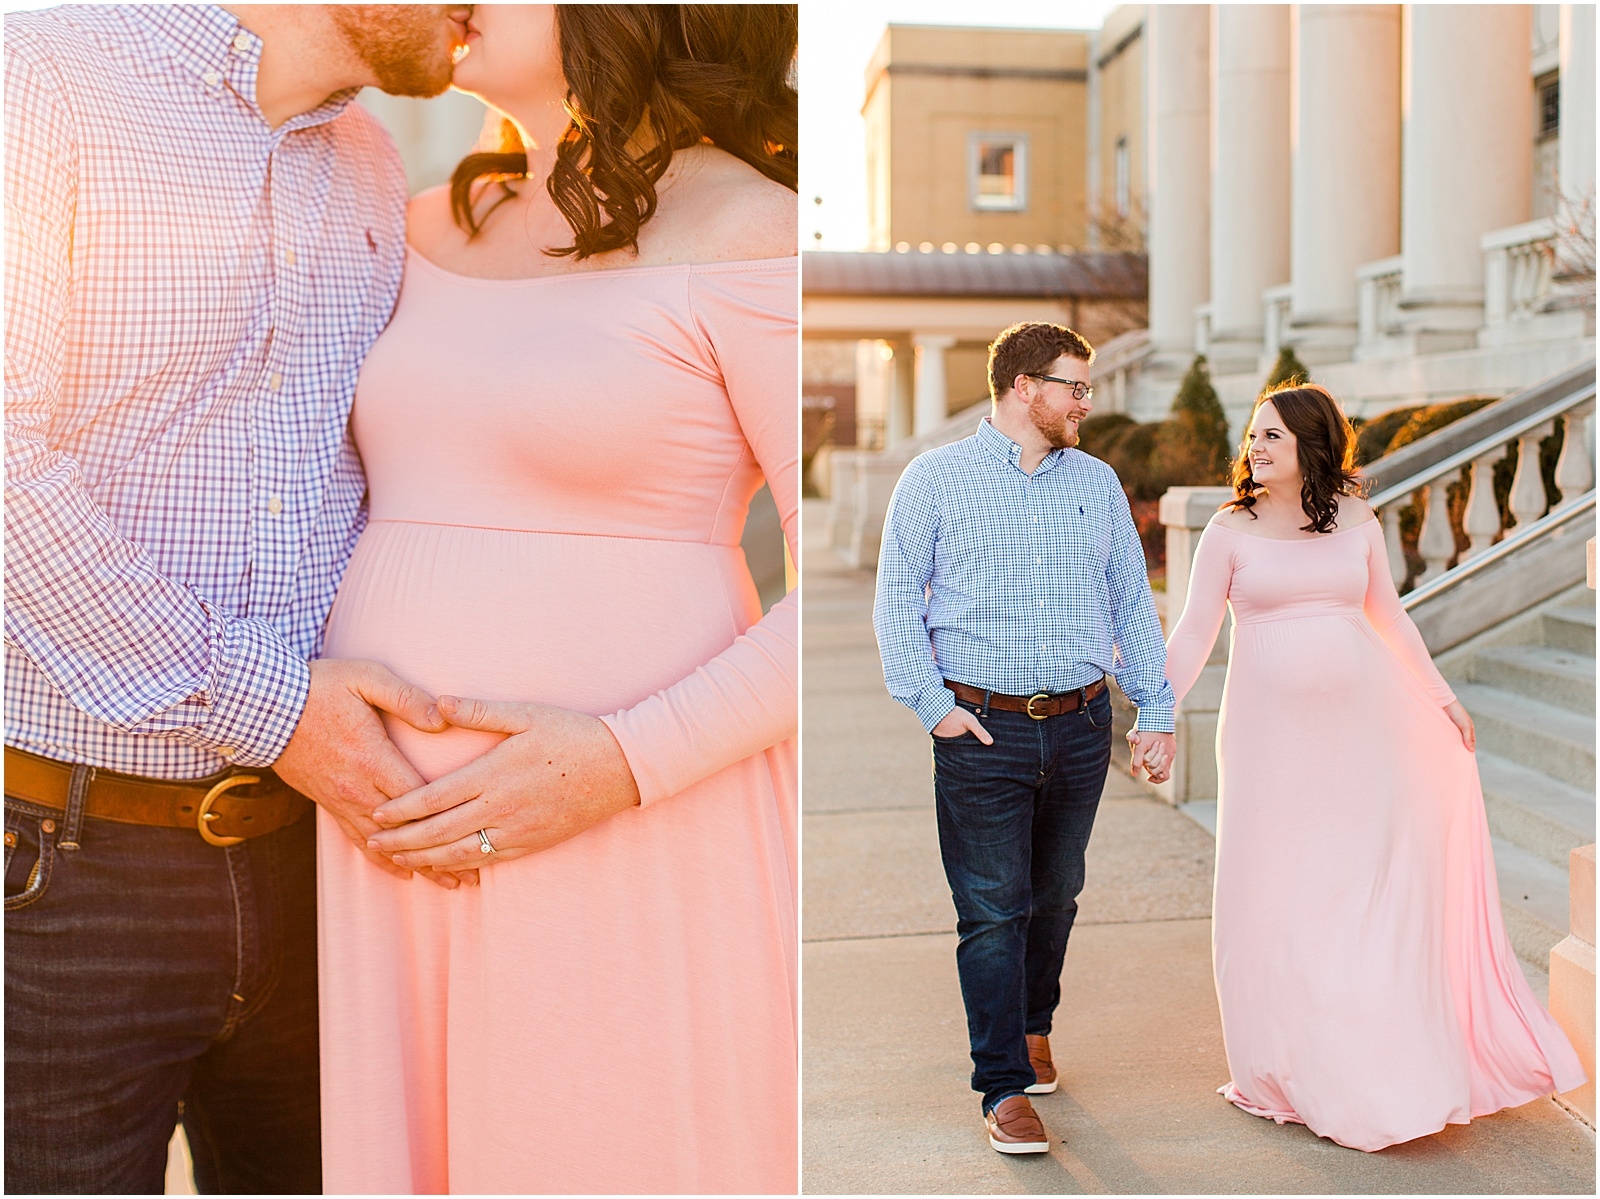 A Downtown Owensboro Maternity Session | Kayla and Grant Evansville Indiana Wedding Photographers-0008.jpg